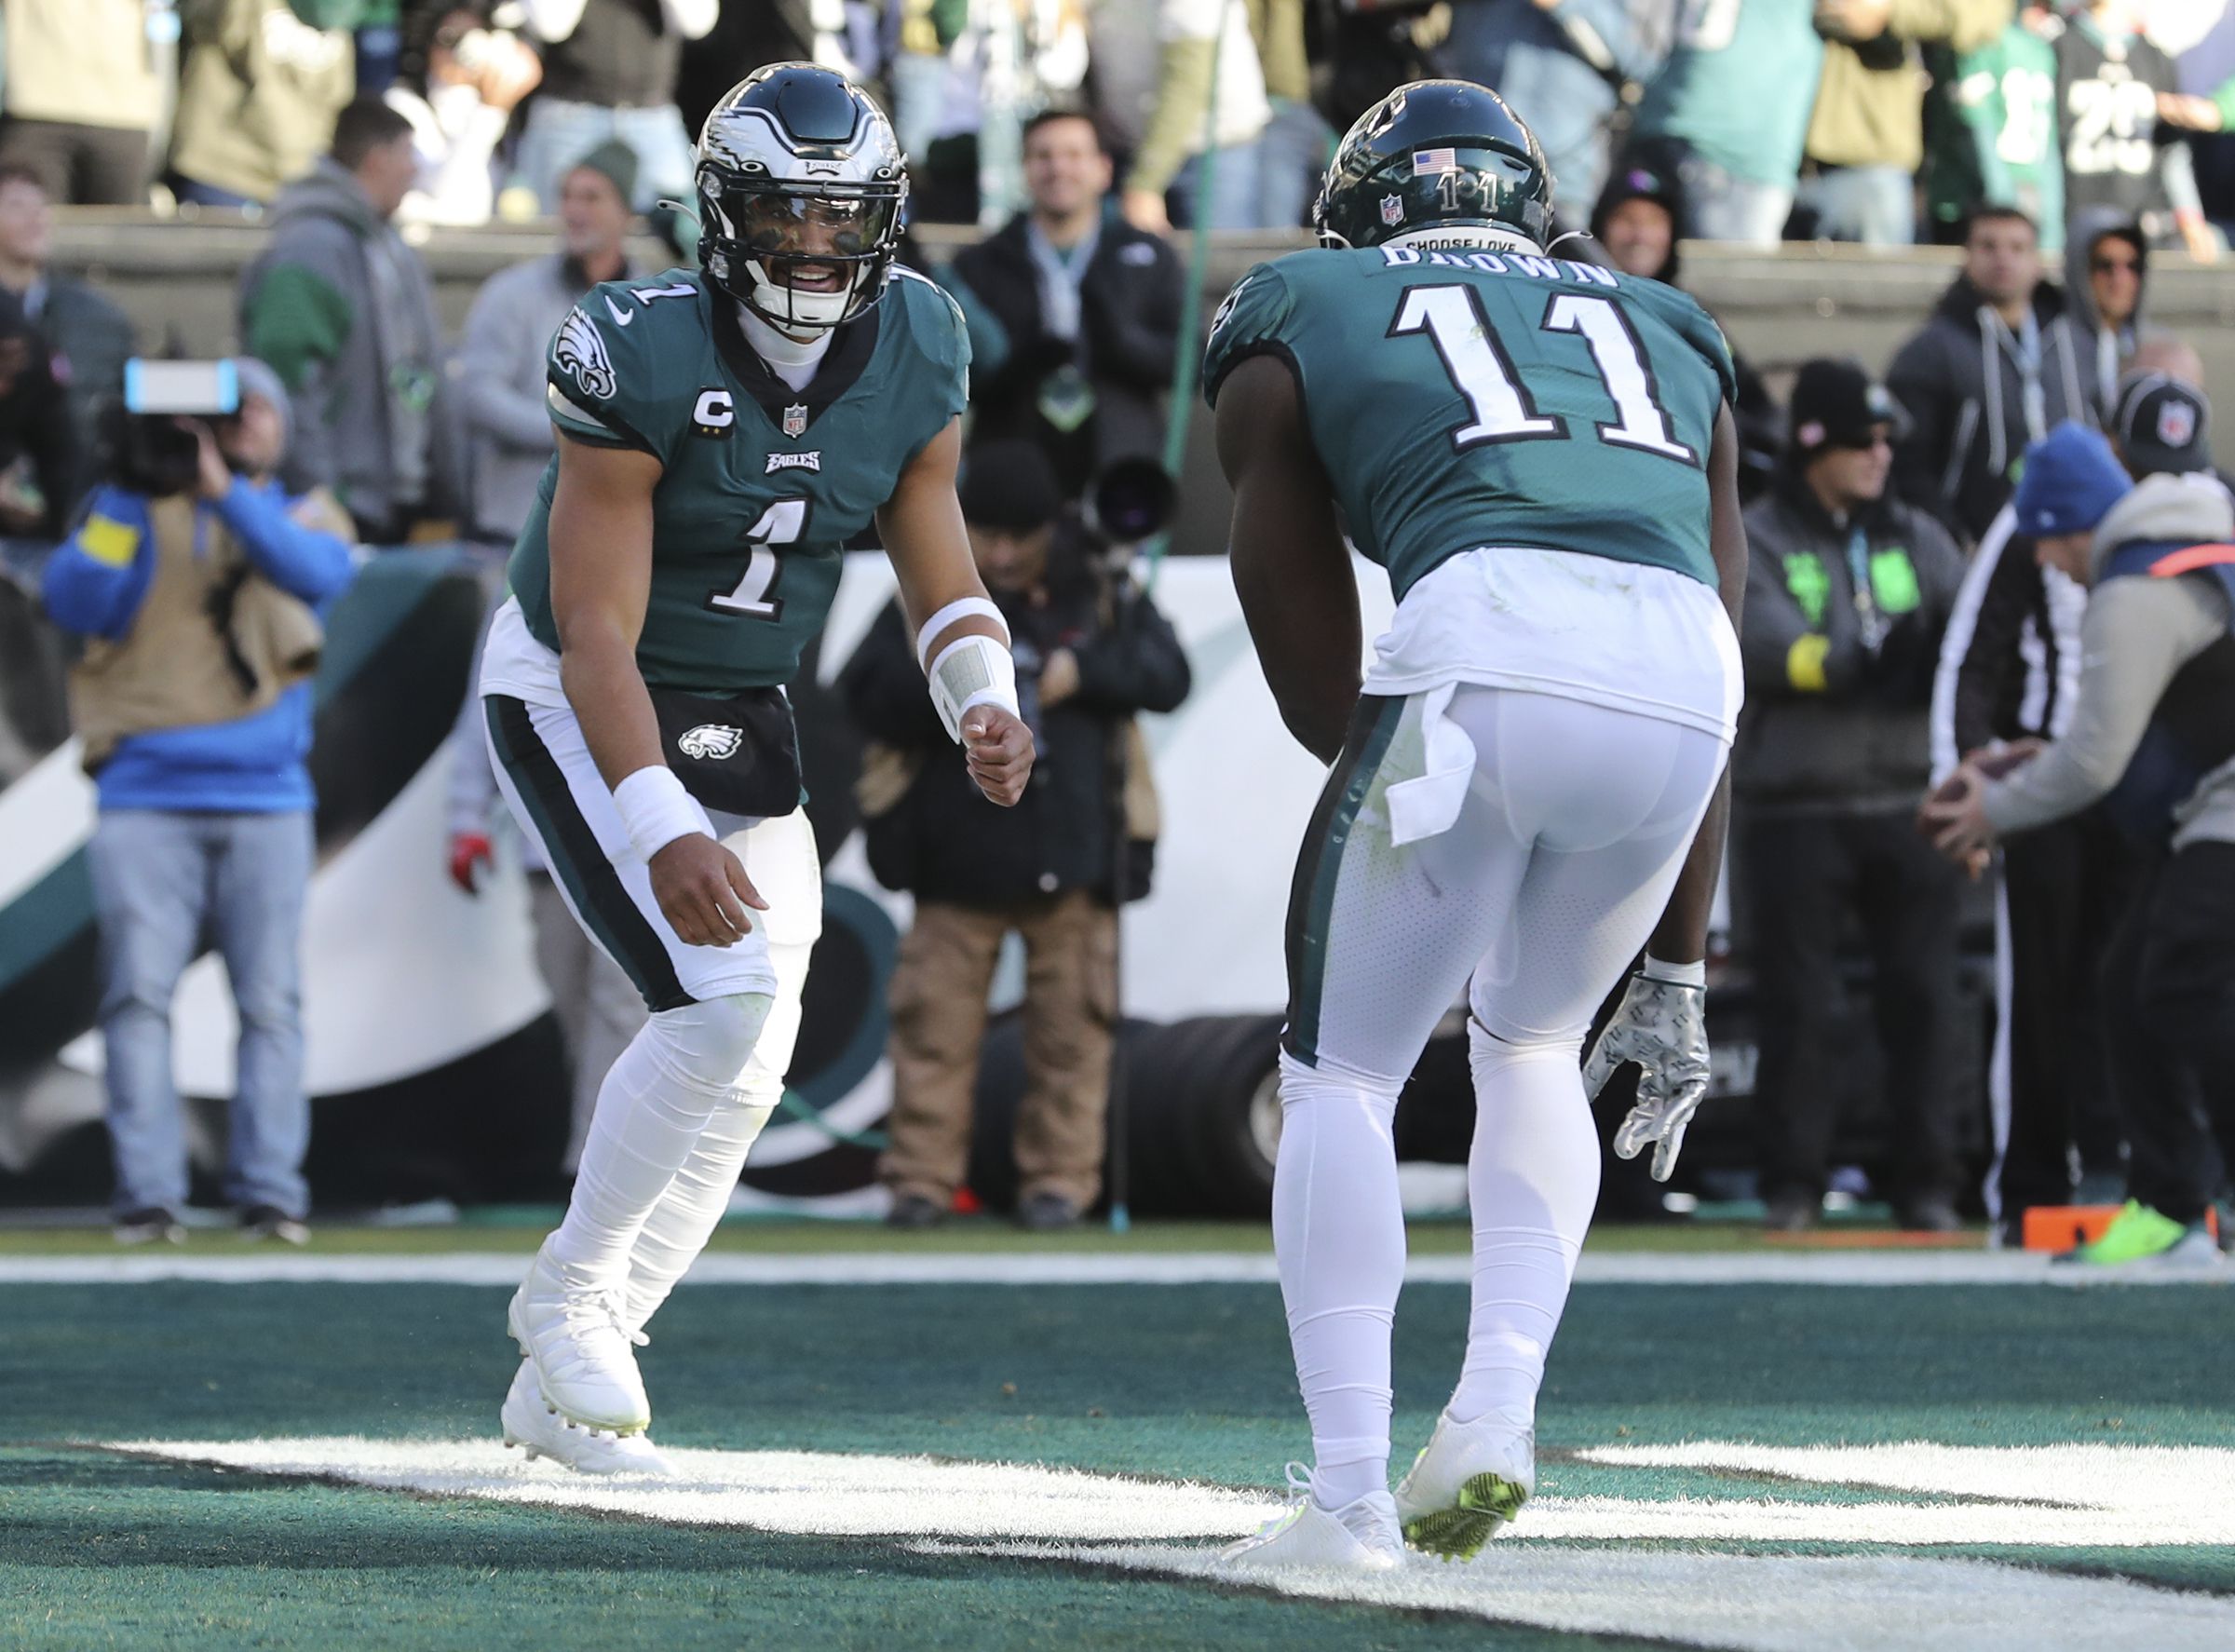 Eagles-Titans analysis: Jalen Hurts and A.J. Brown are